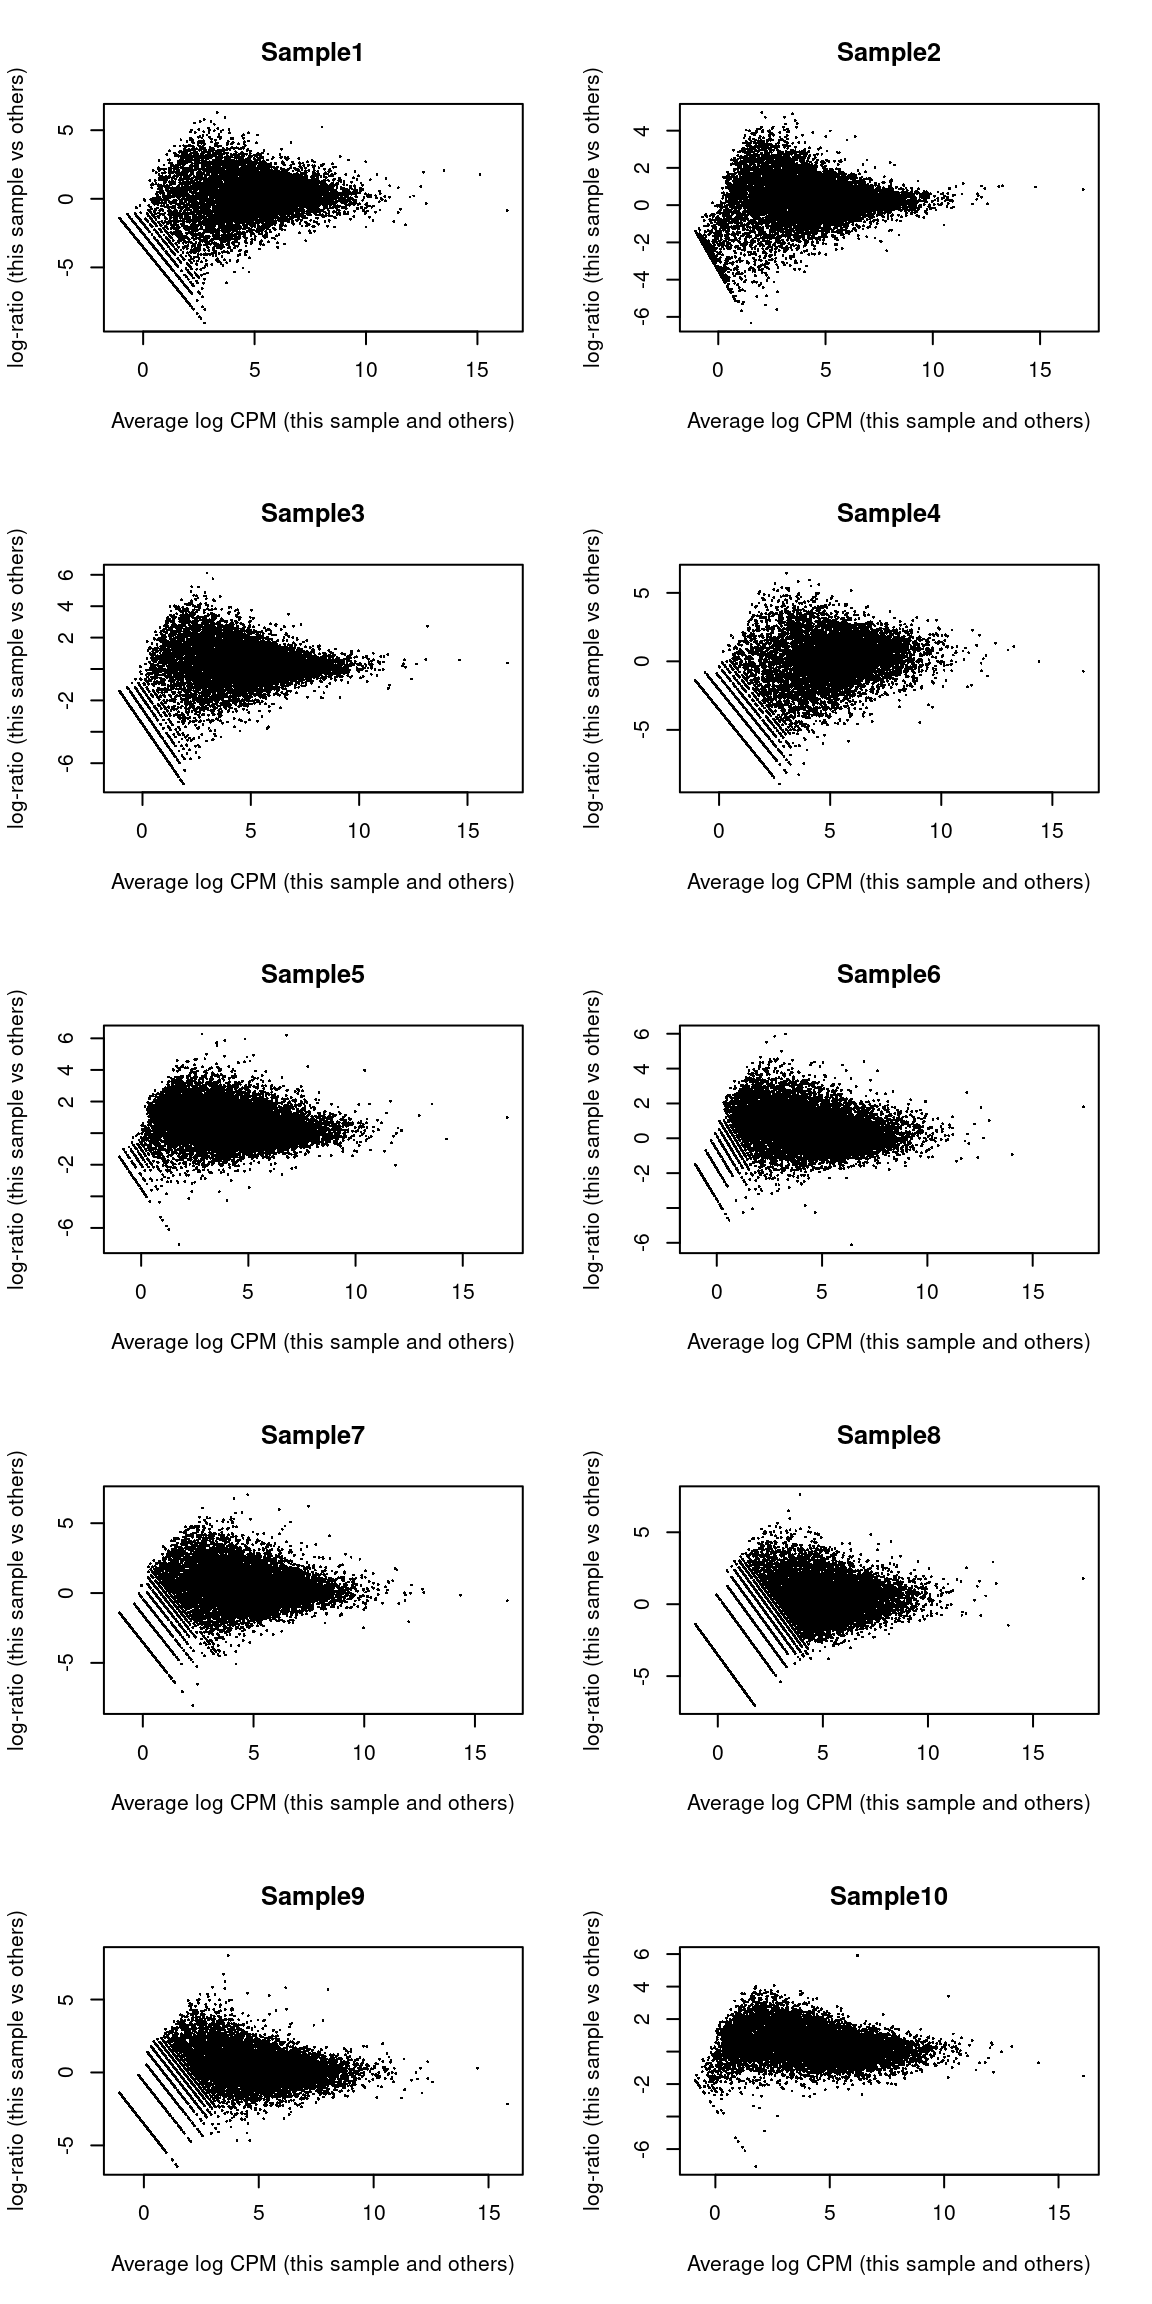 MA plots for the beta cell pseudo-bulk profiles. Each MA plot is generated by comparing the corresponding pseudo-bulk profile against the average of all other profiles